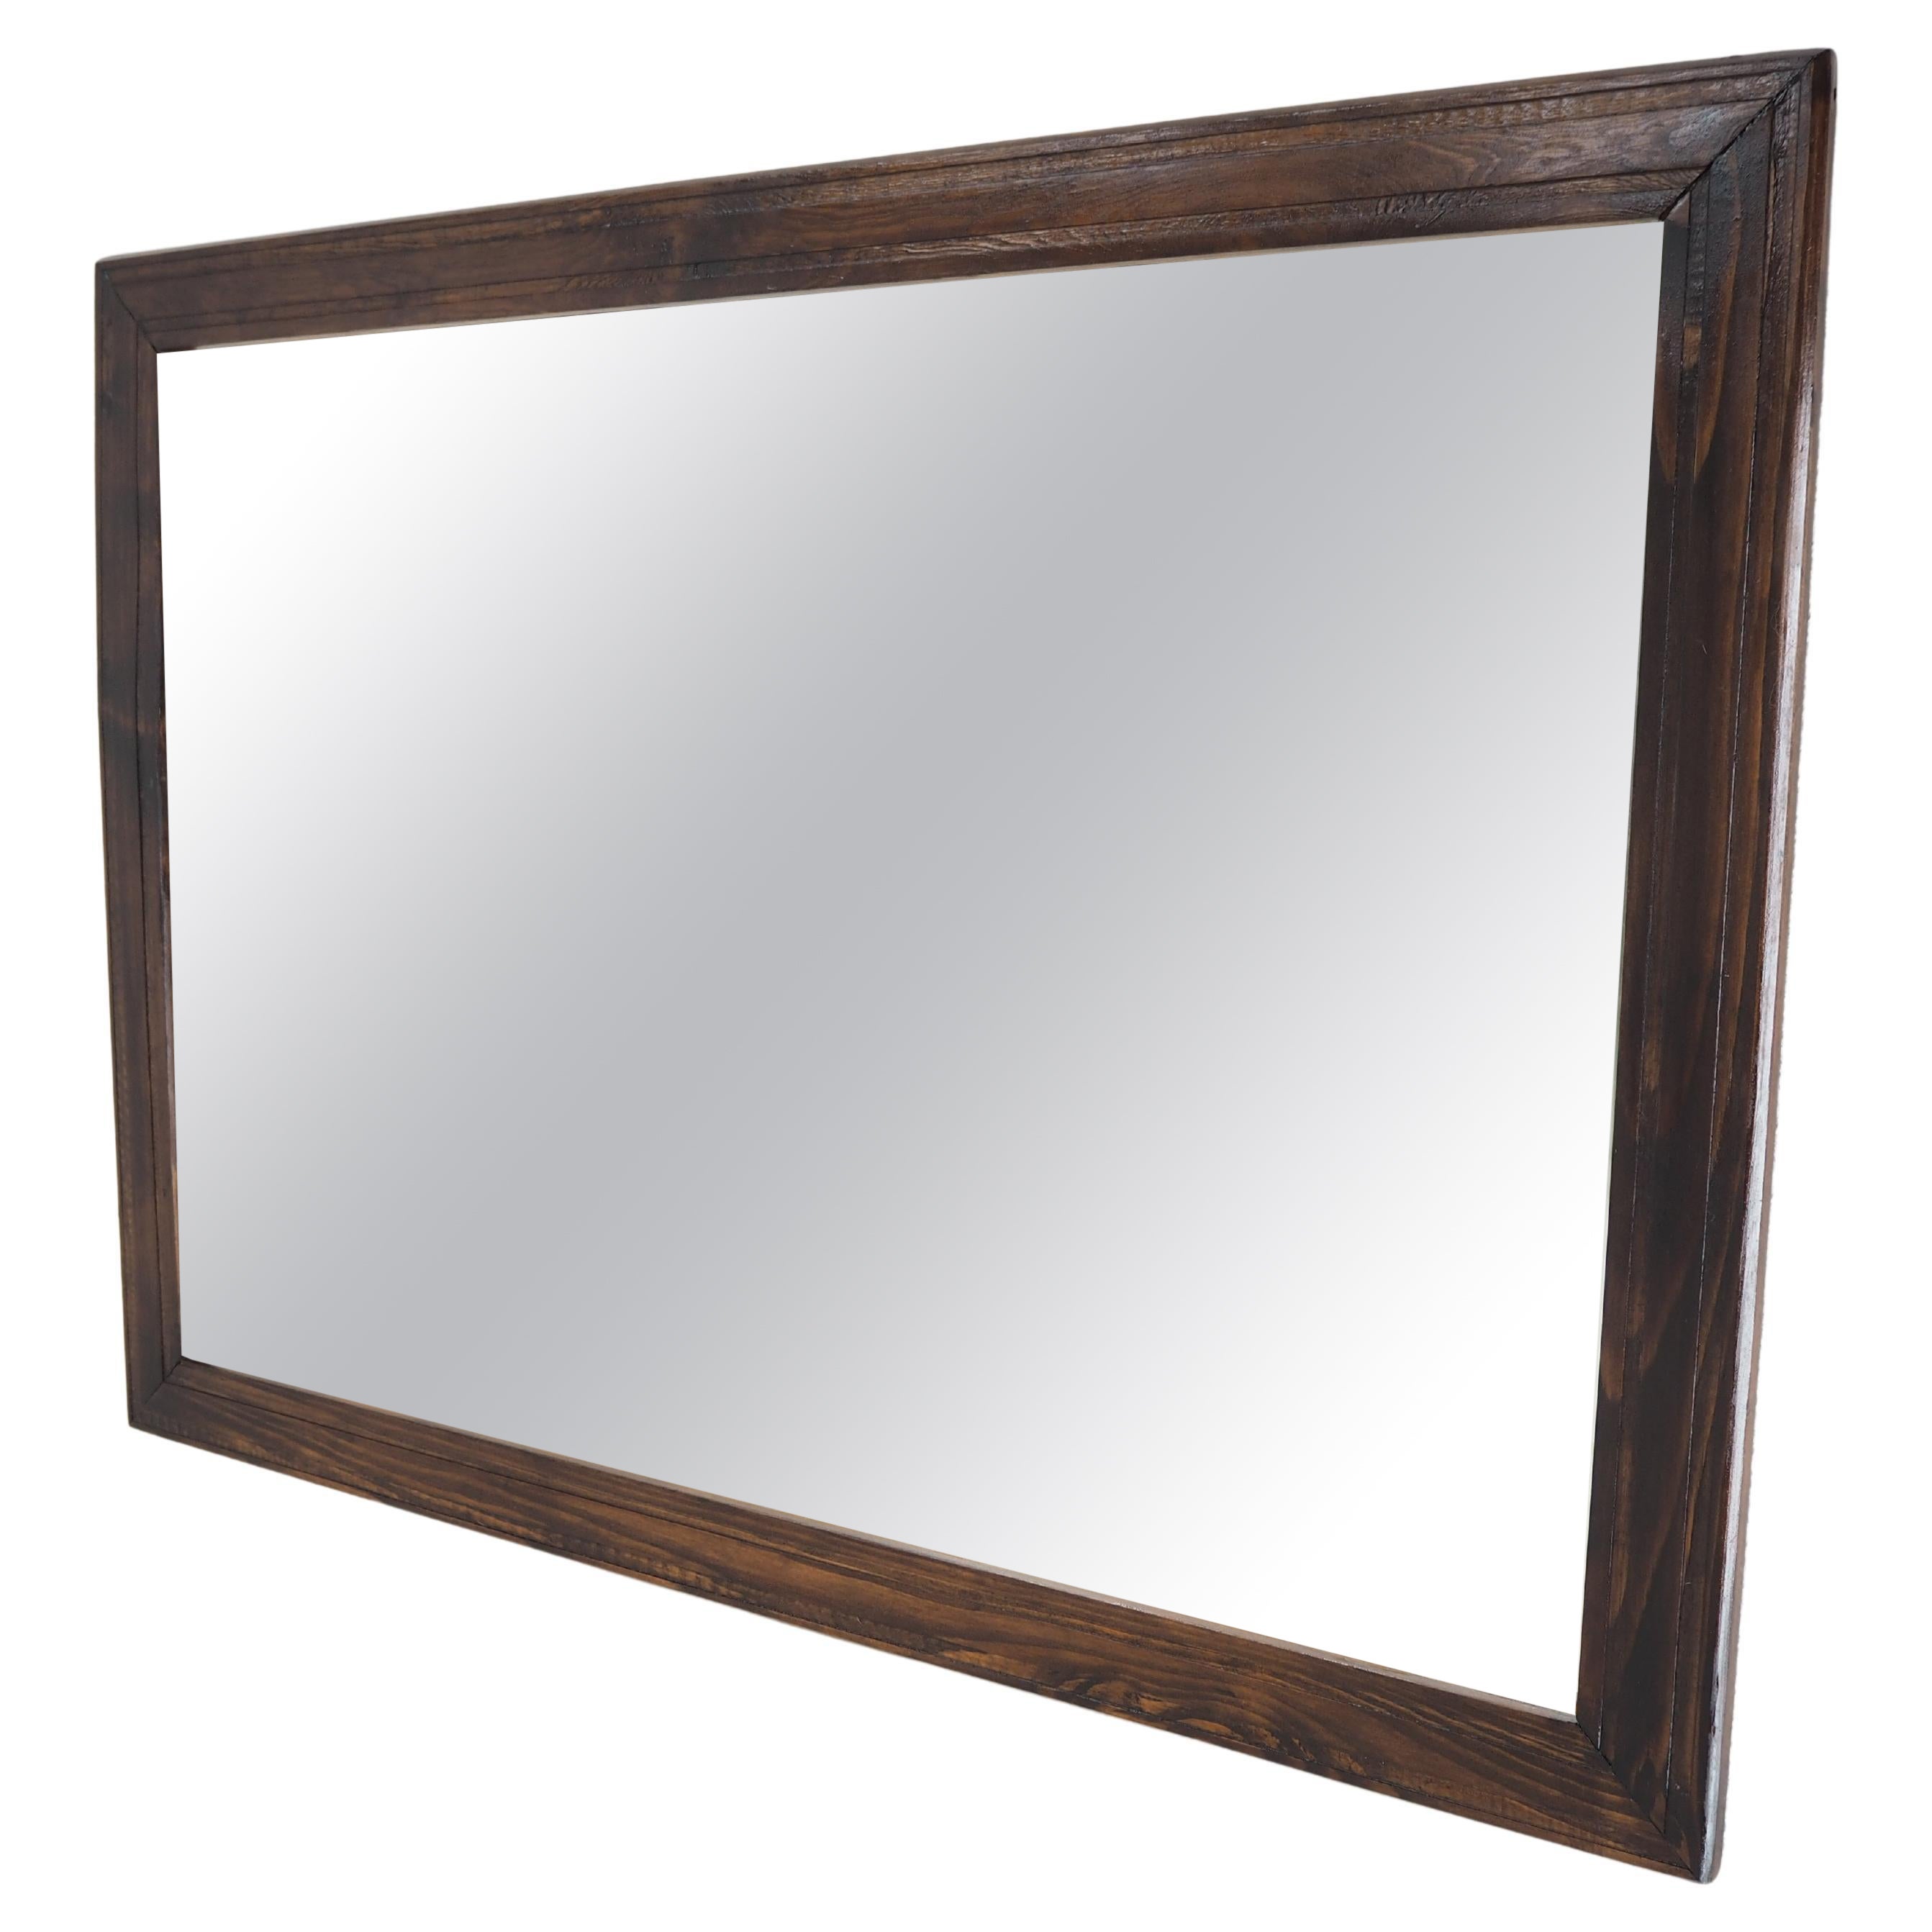 Midcentury Wood Wall Mirror, Europe, 1960s For Sale